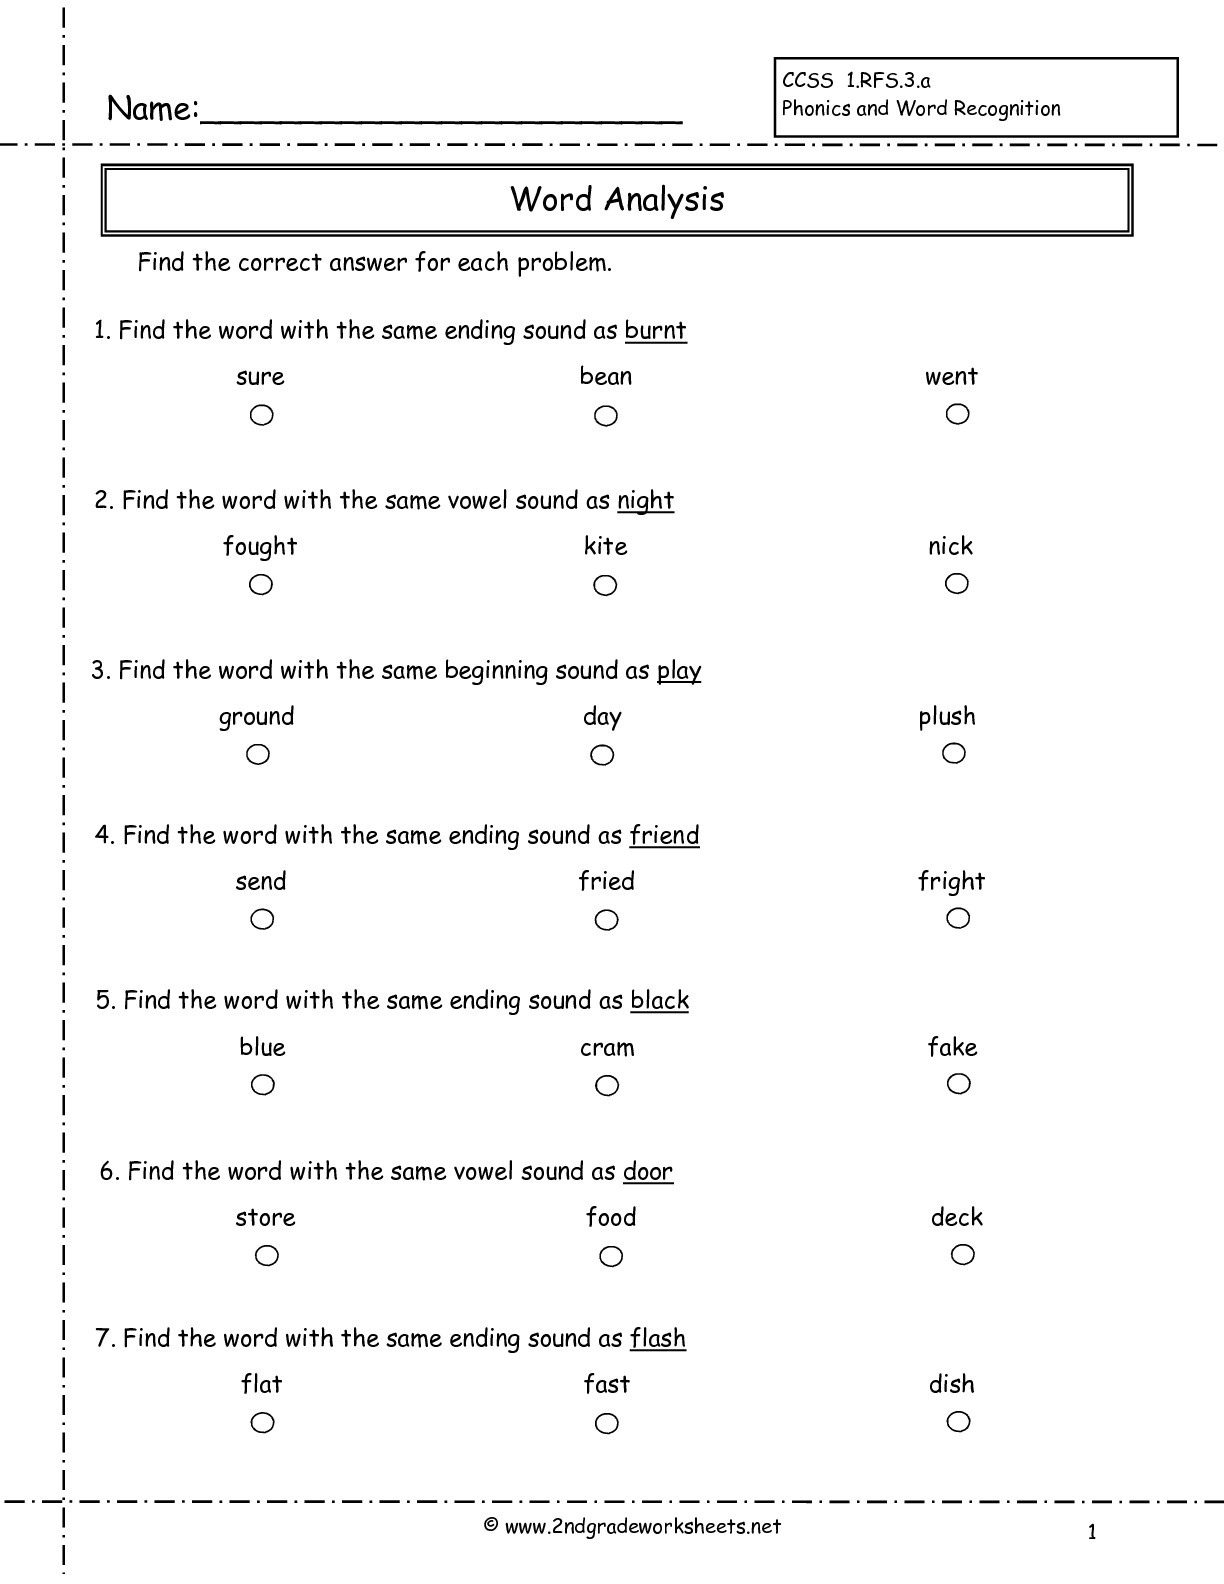 Second Grade Phonics Worksheets And Flashcards - Free Printable Phonics Worksheets For 4Th Grade